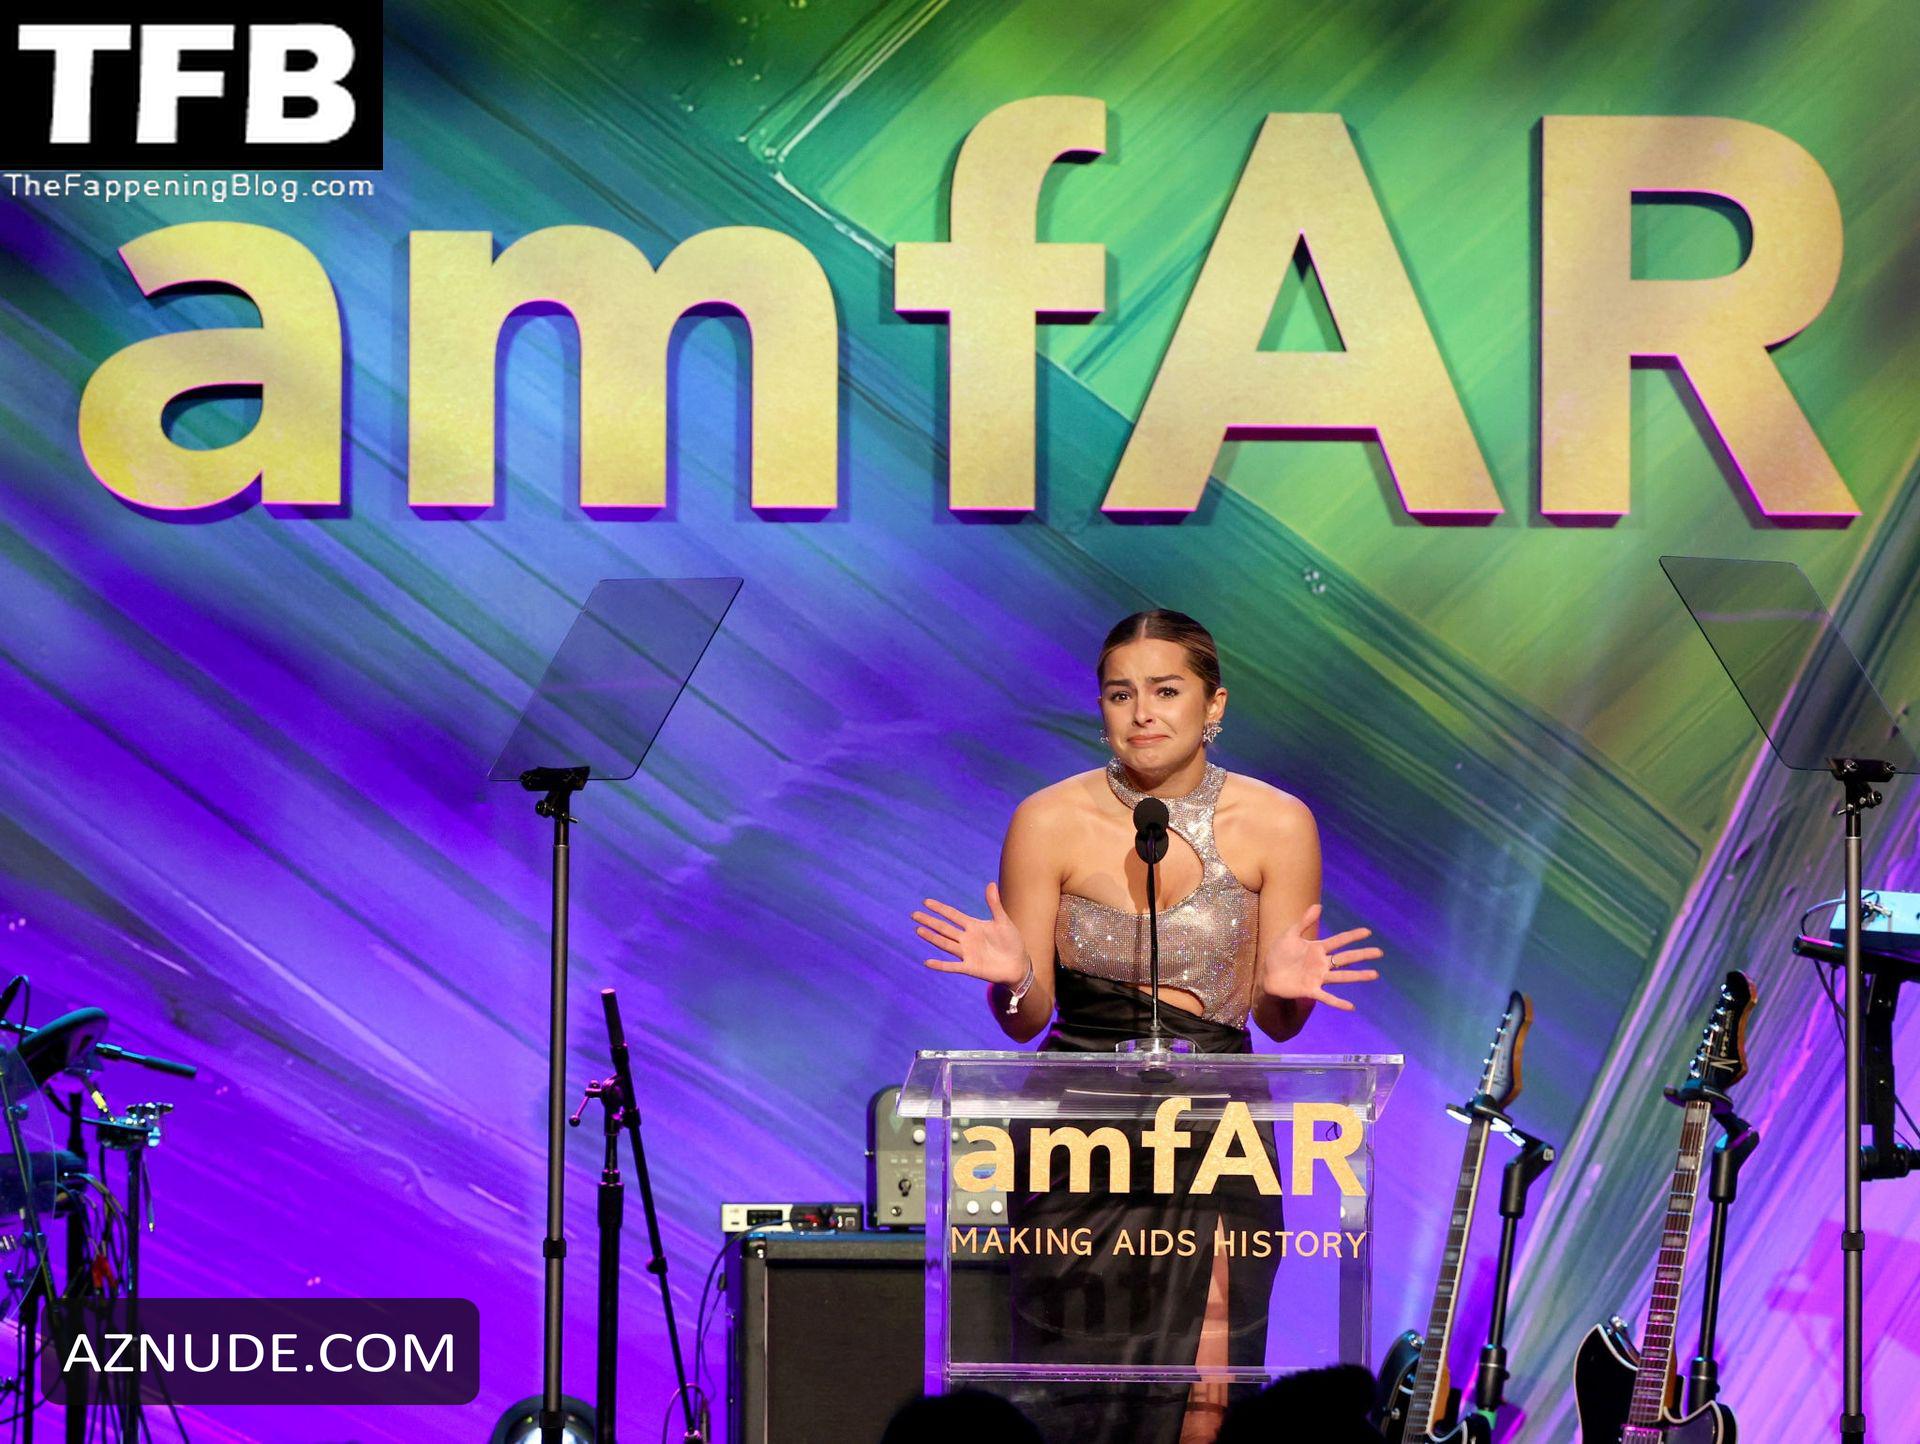 Addison Rae Sexy Seen Flaunting Her Big Boobs And Hot Legs In A Silky Black Gown At The Amfar 